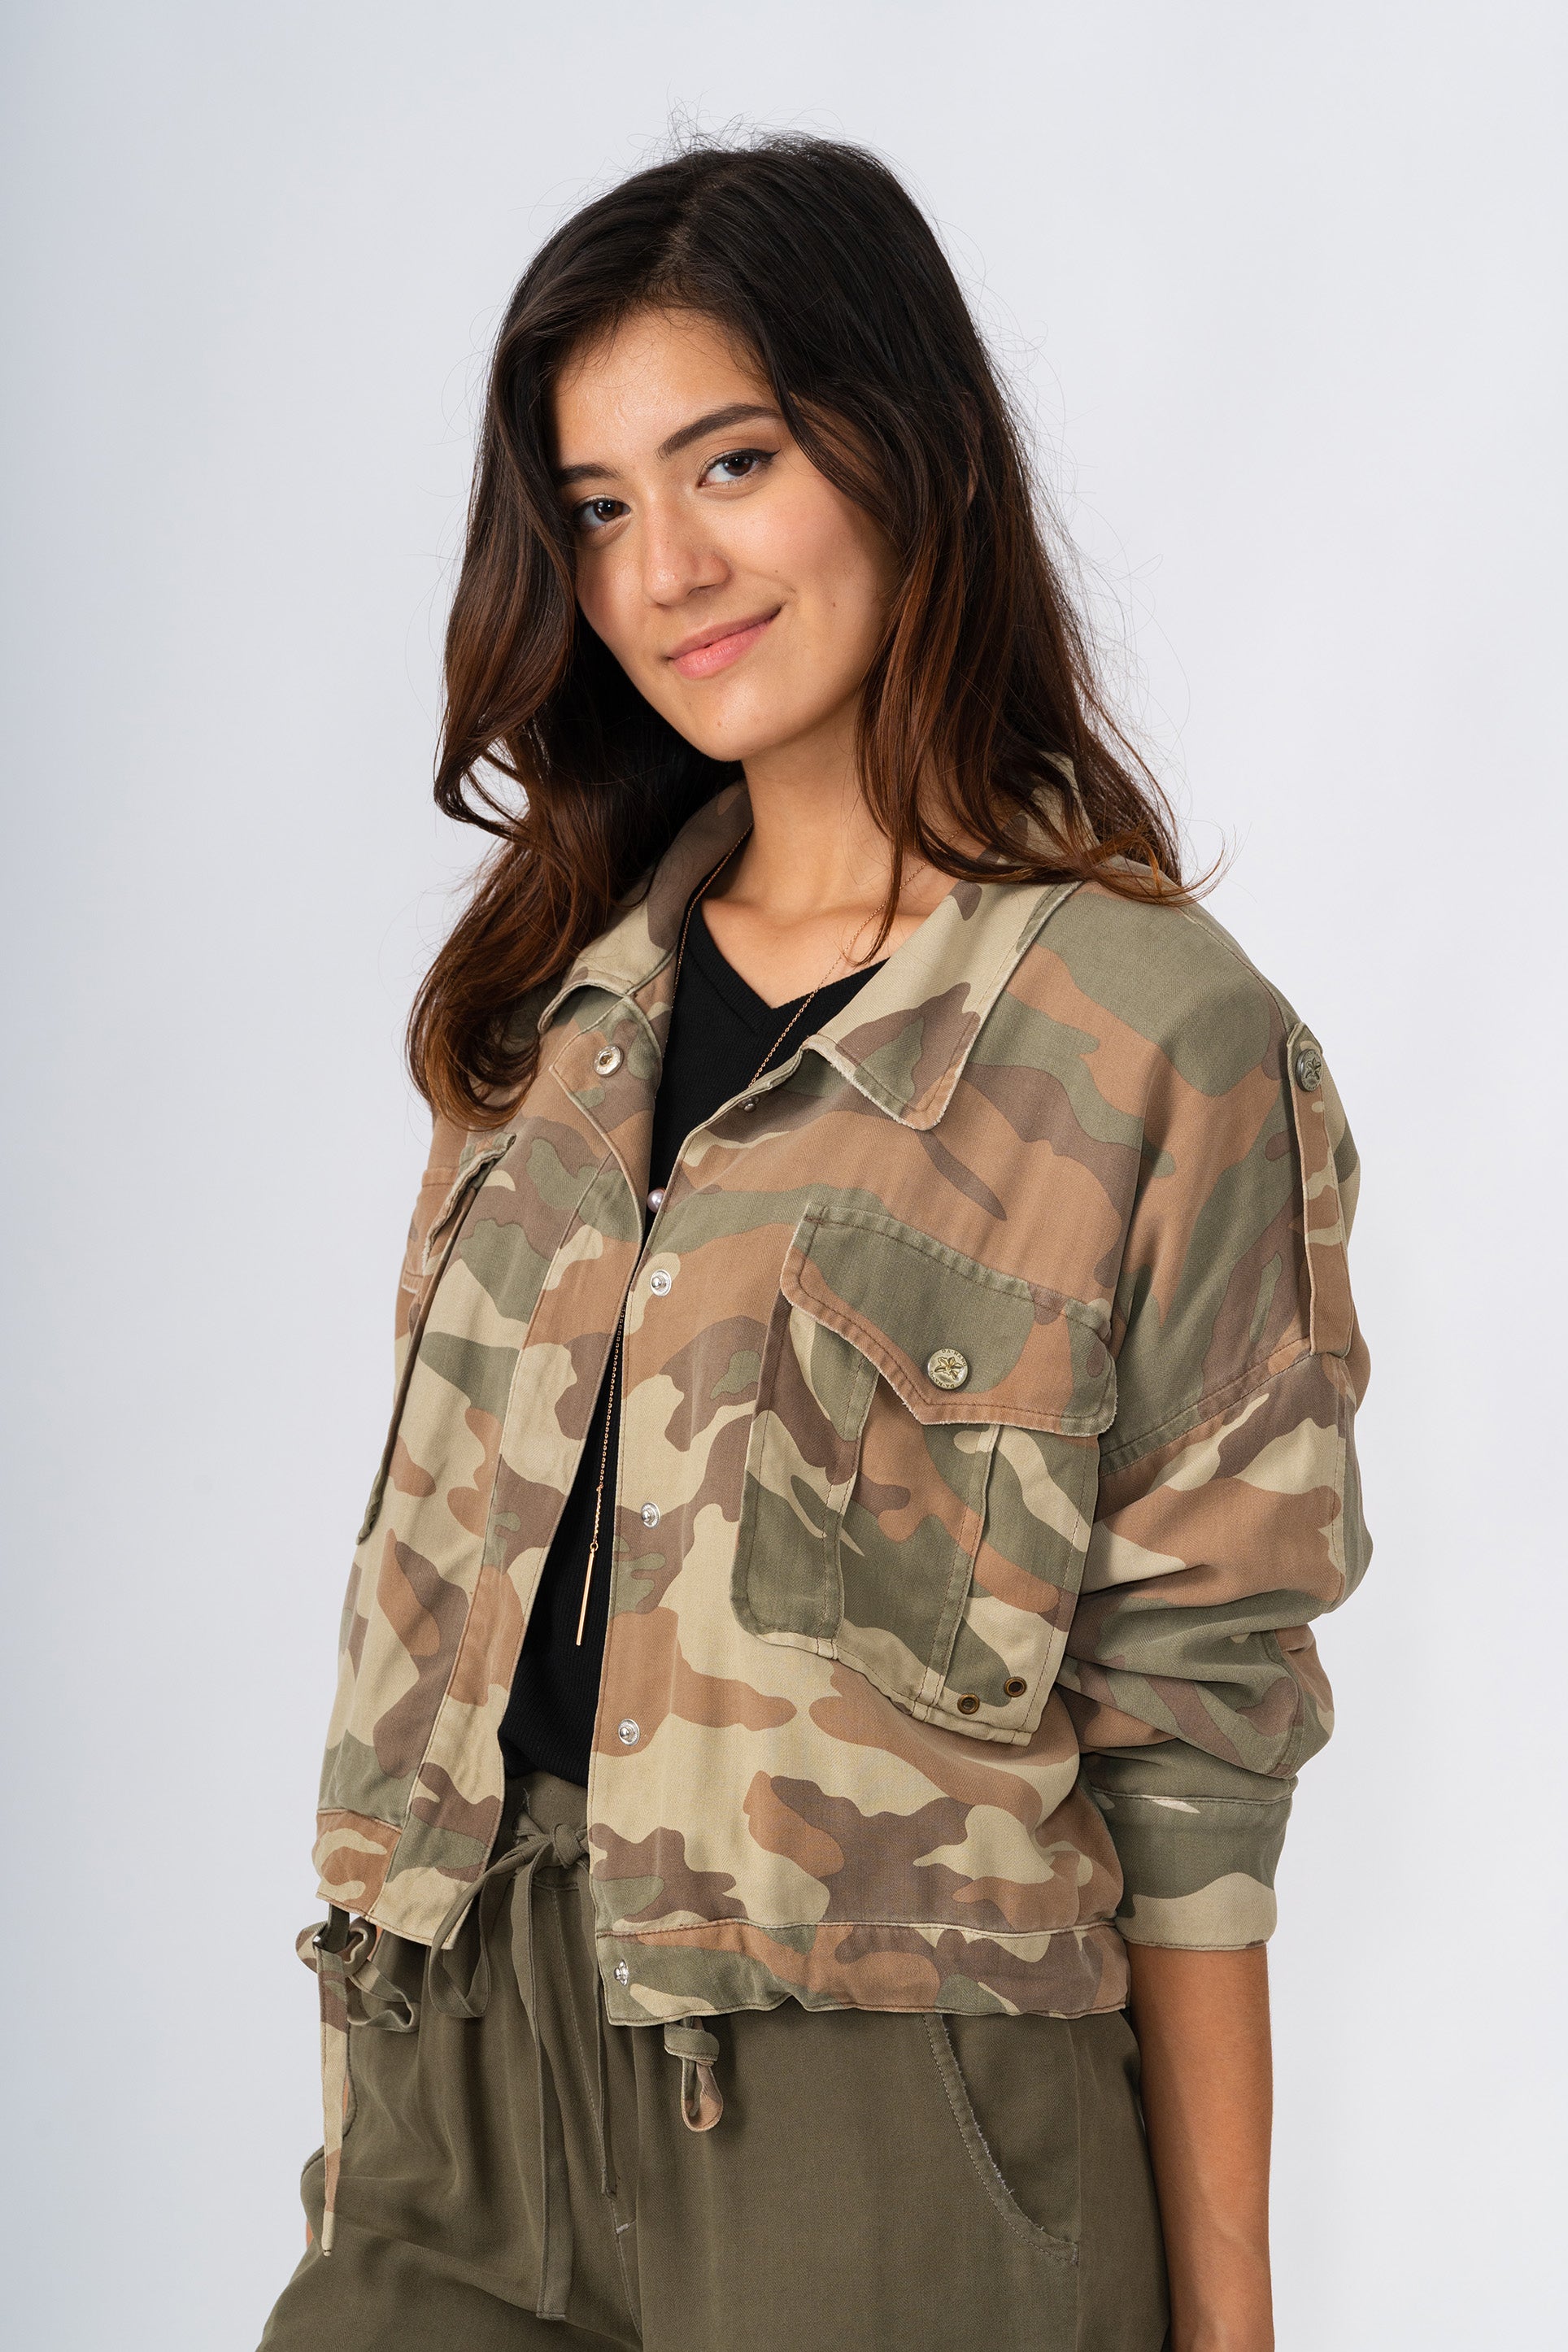 100% Silk crop lined jacket with embroidery in Moss Camo